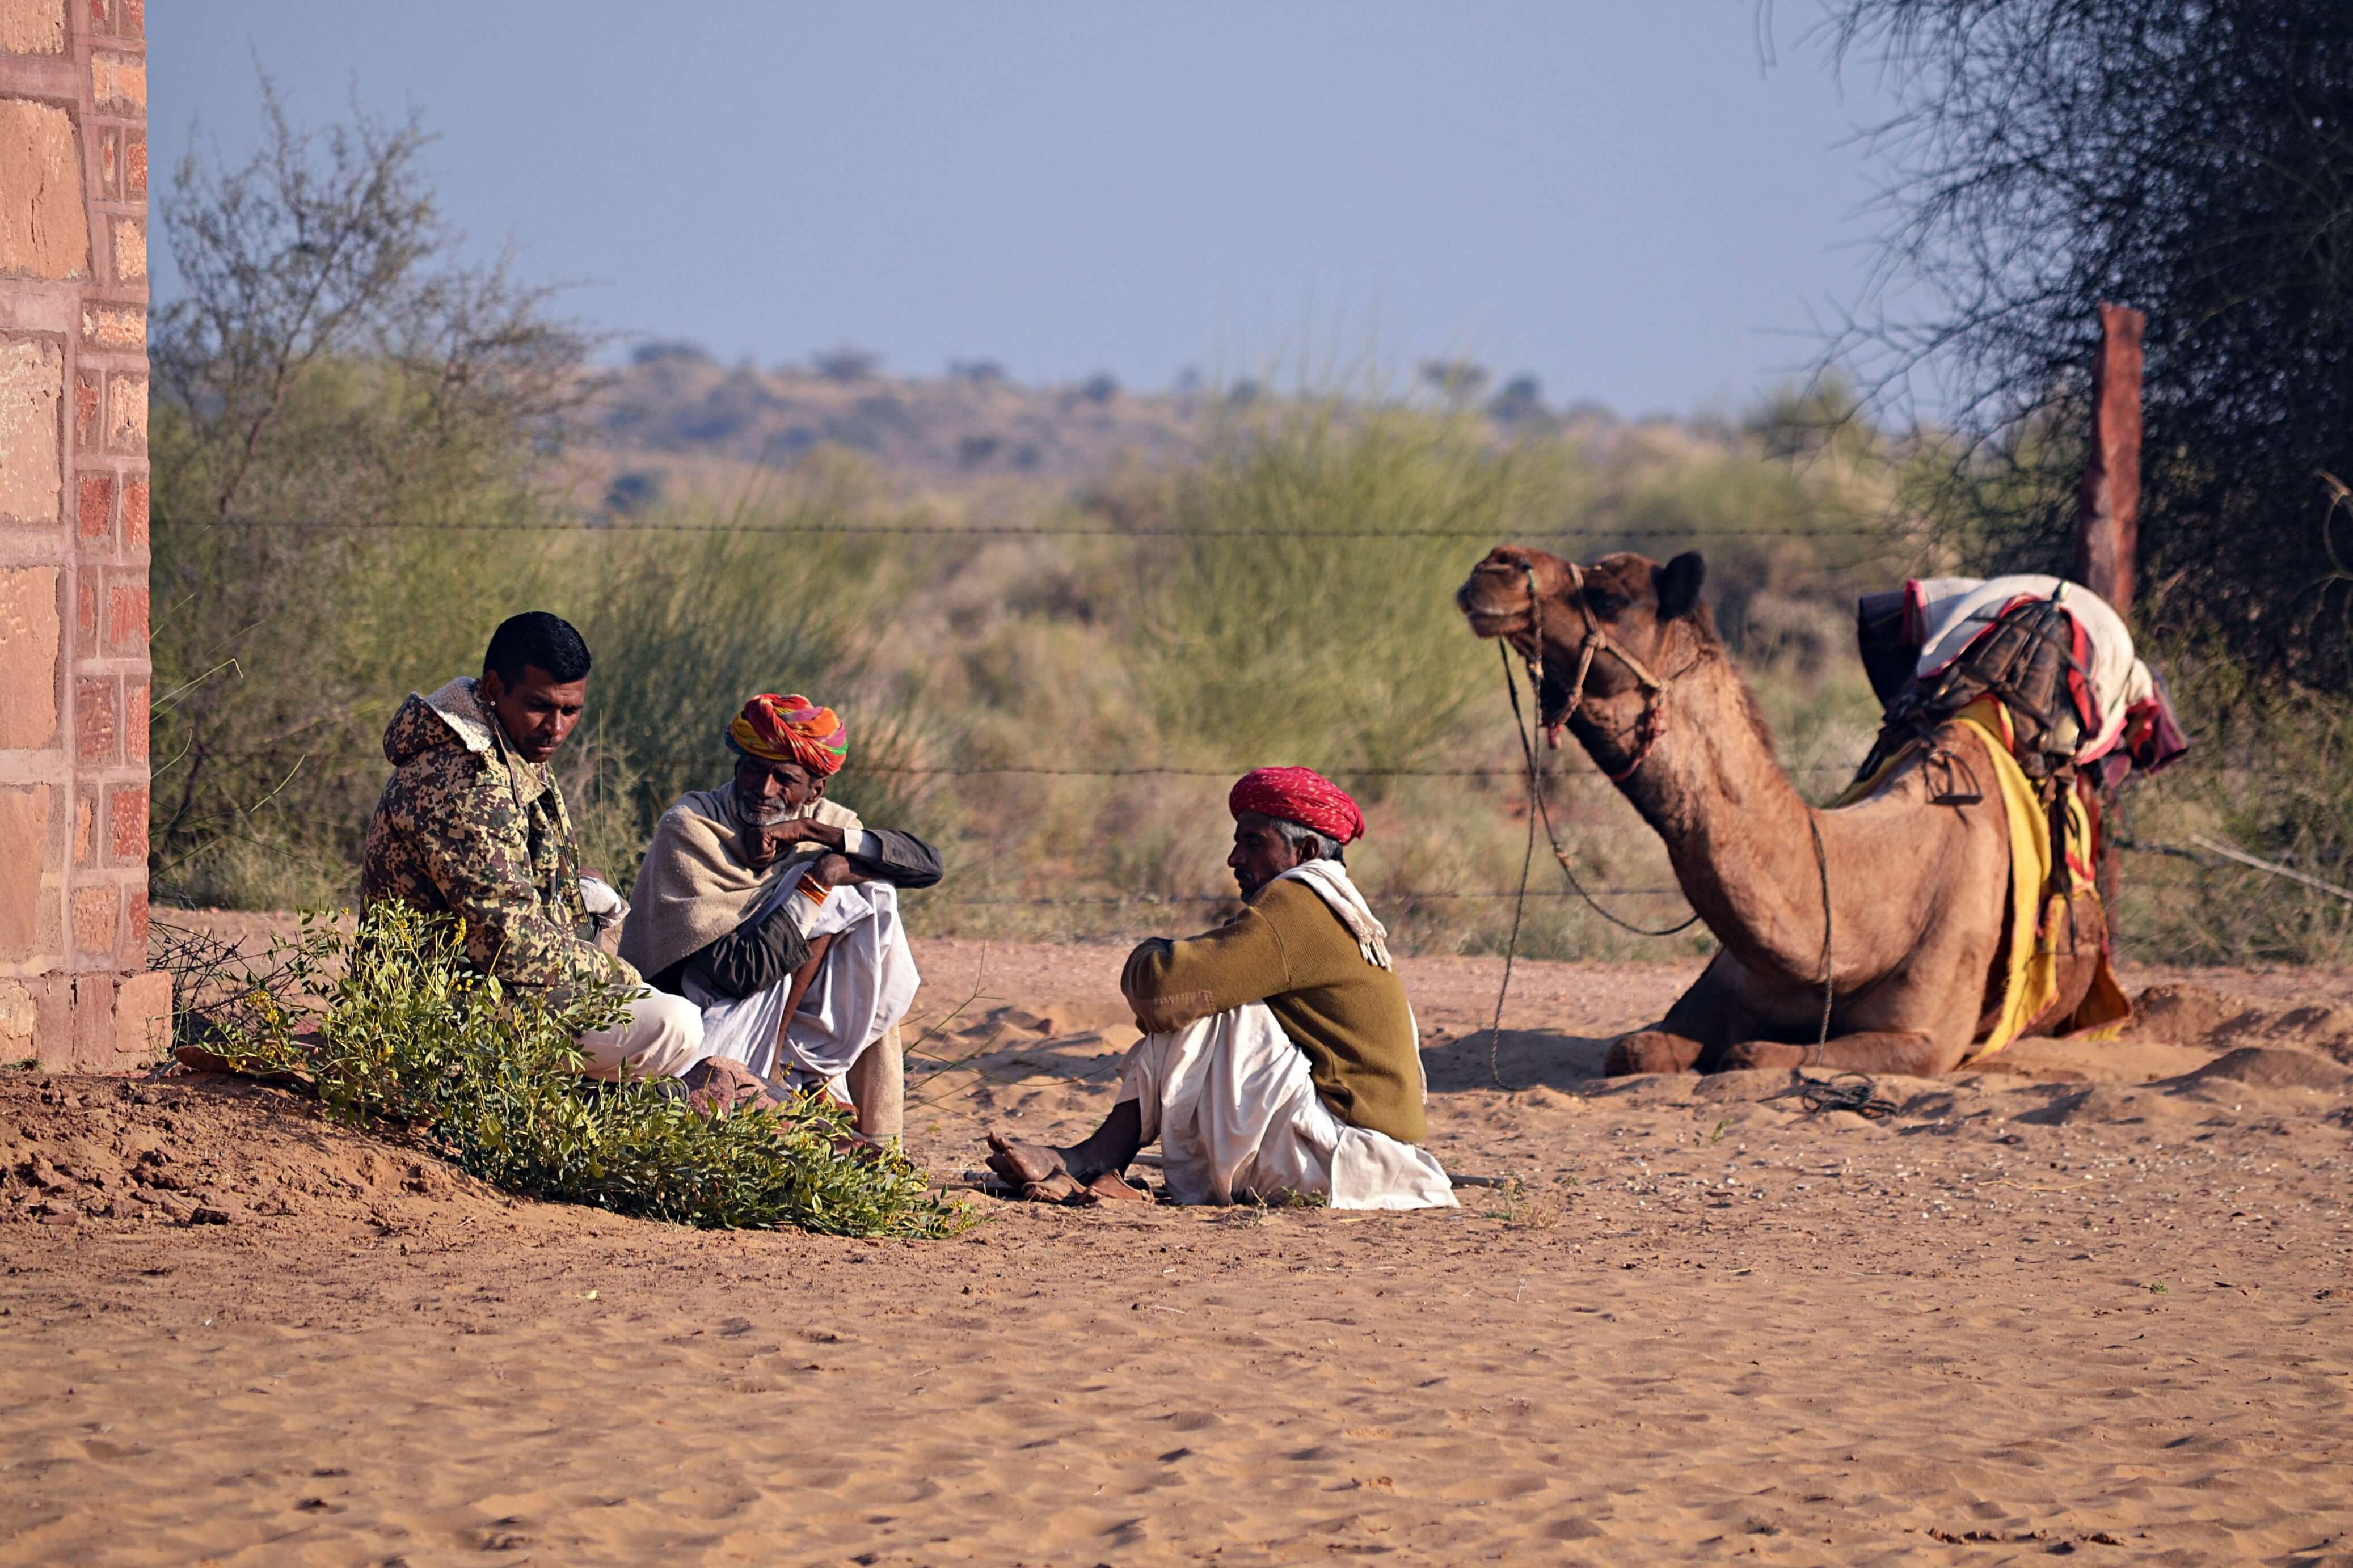 A group of camel herders taking a break. Camel breeding and herding practices are passed down within families for generations. Photo by Stuti Bhadauria 